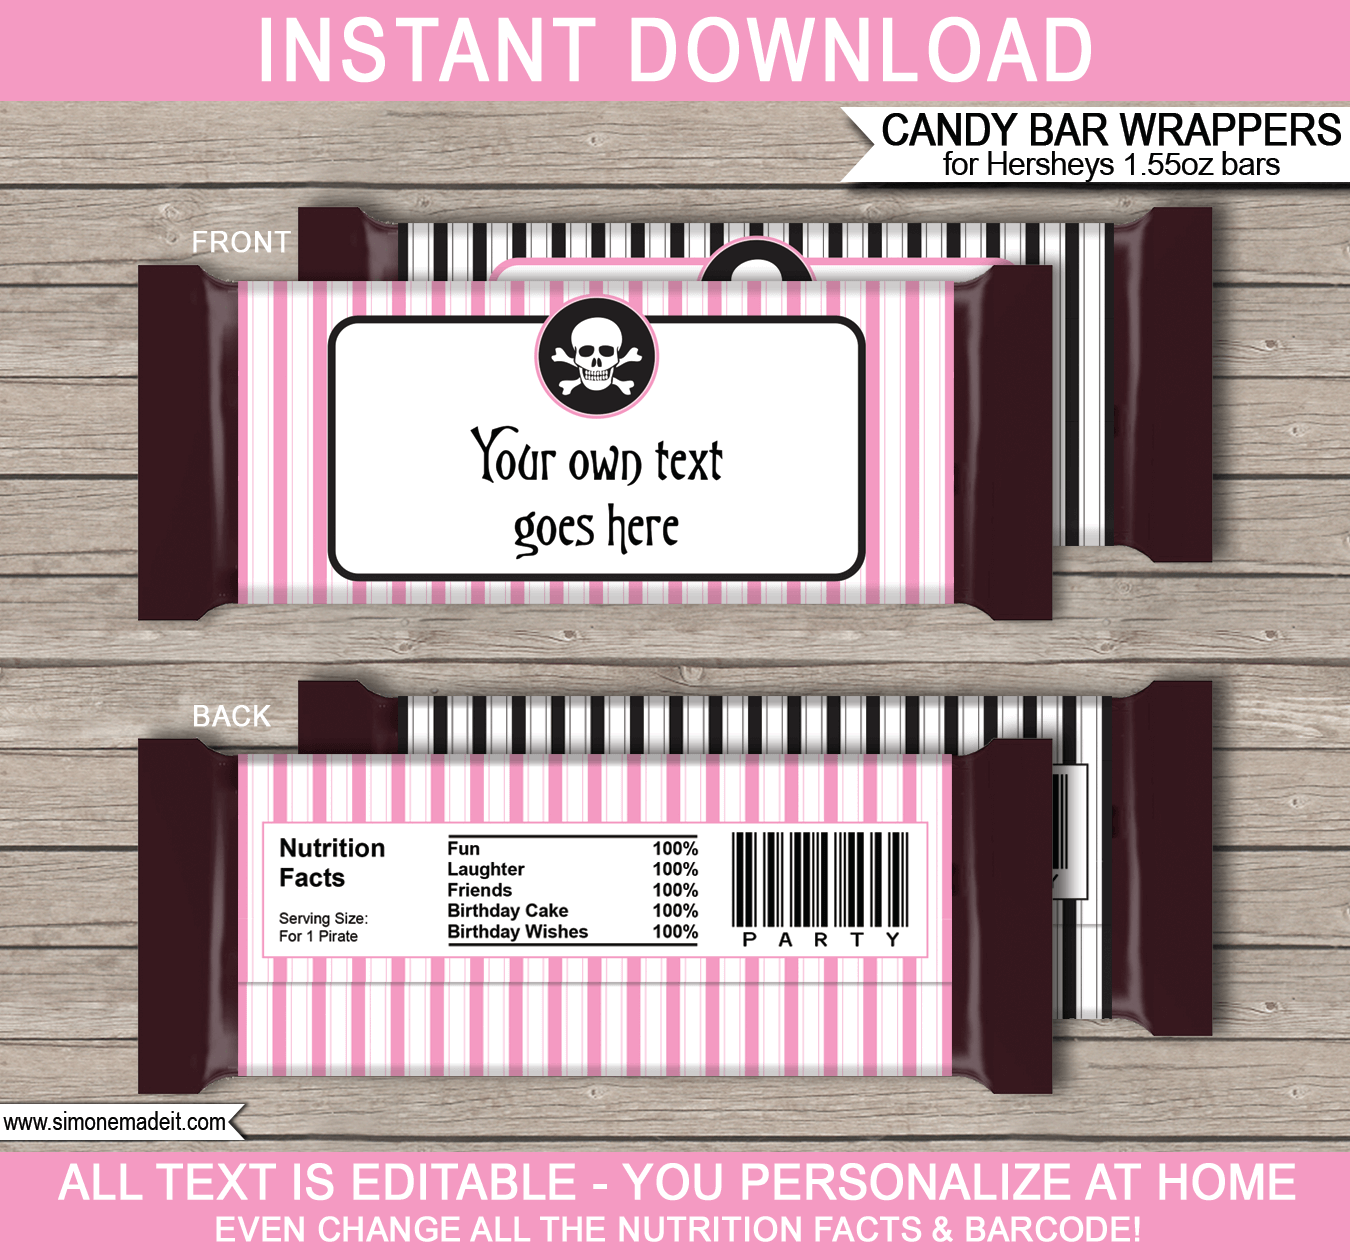 Girl Pirate Hershey Candy Bar Wrappers | Birthday Party Favors | Personalized Candy Bars | Editable Template | INSTANT DOWNLOAD $3.00 via simonemadeit.com